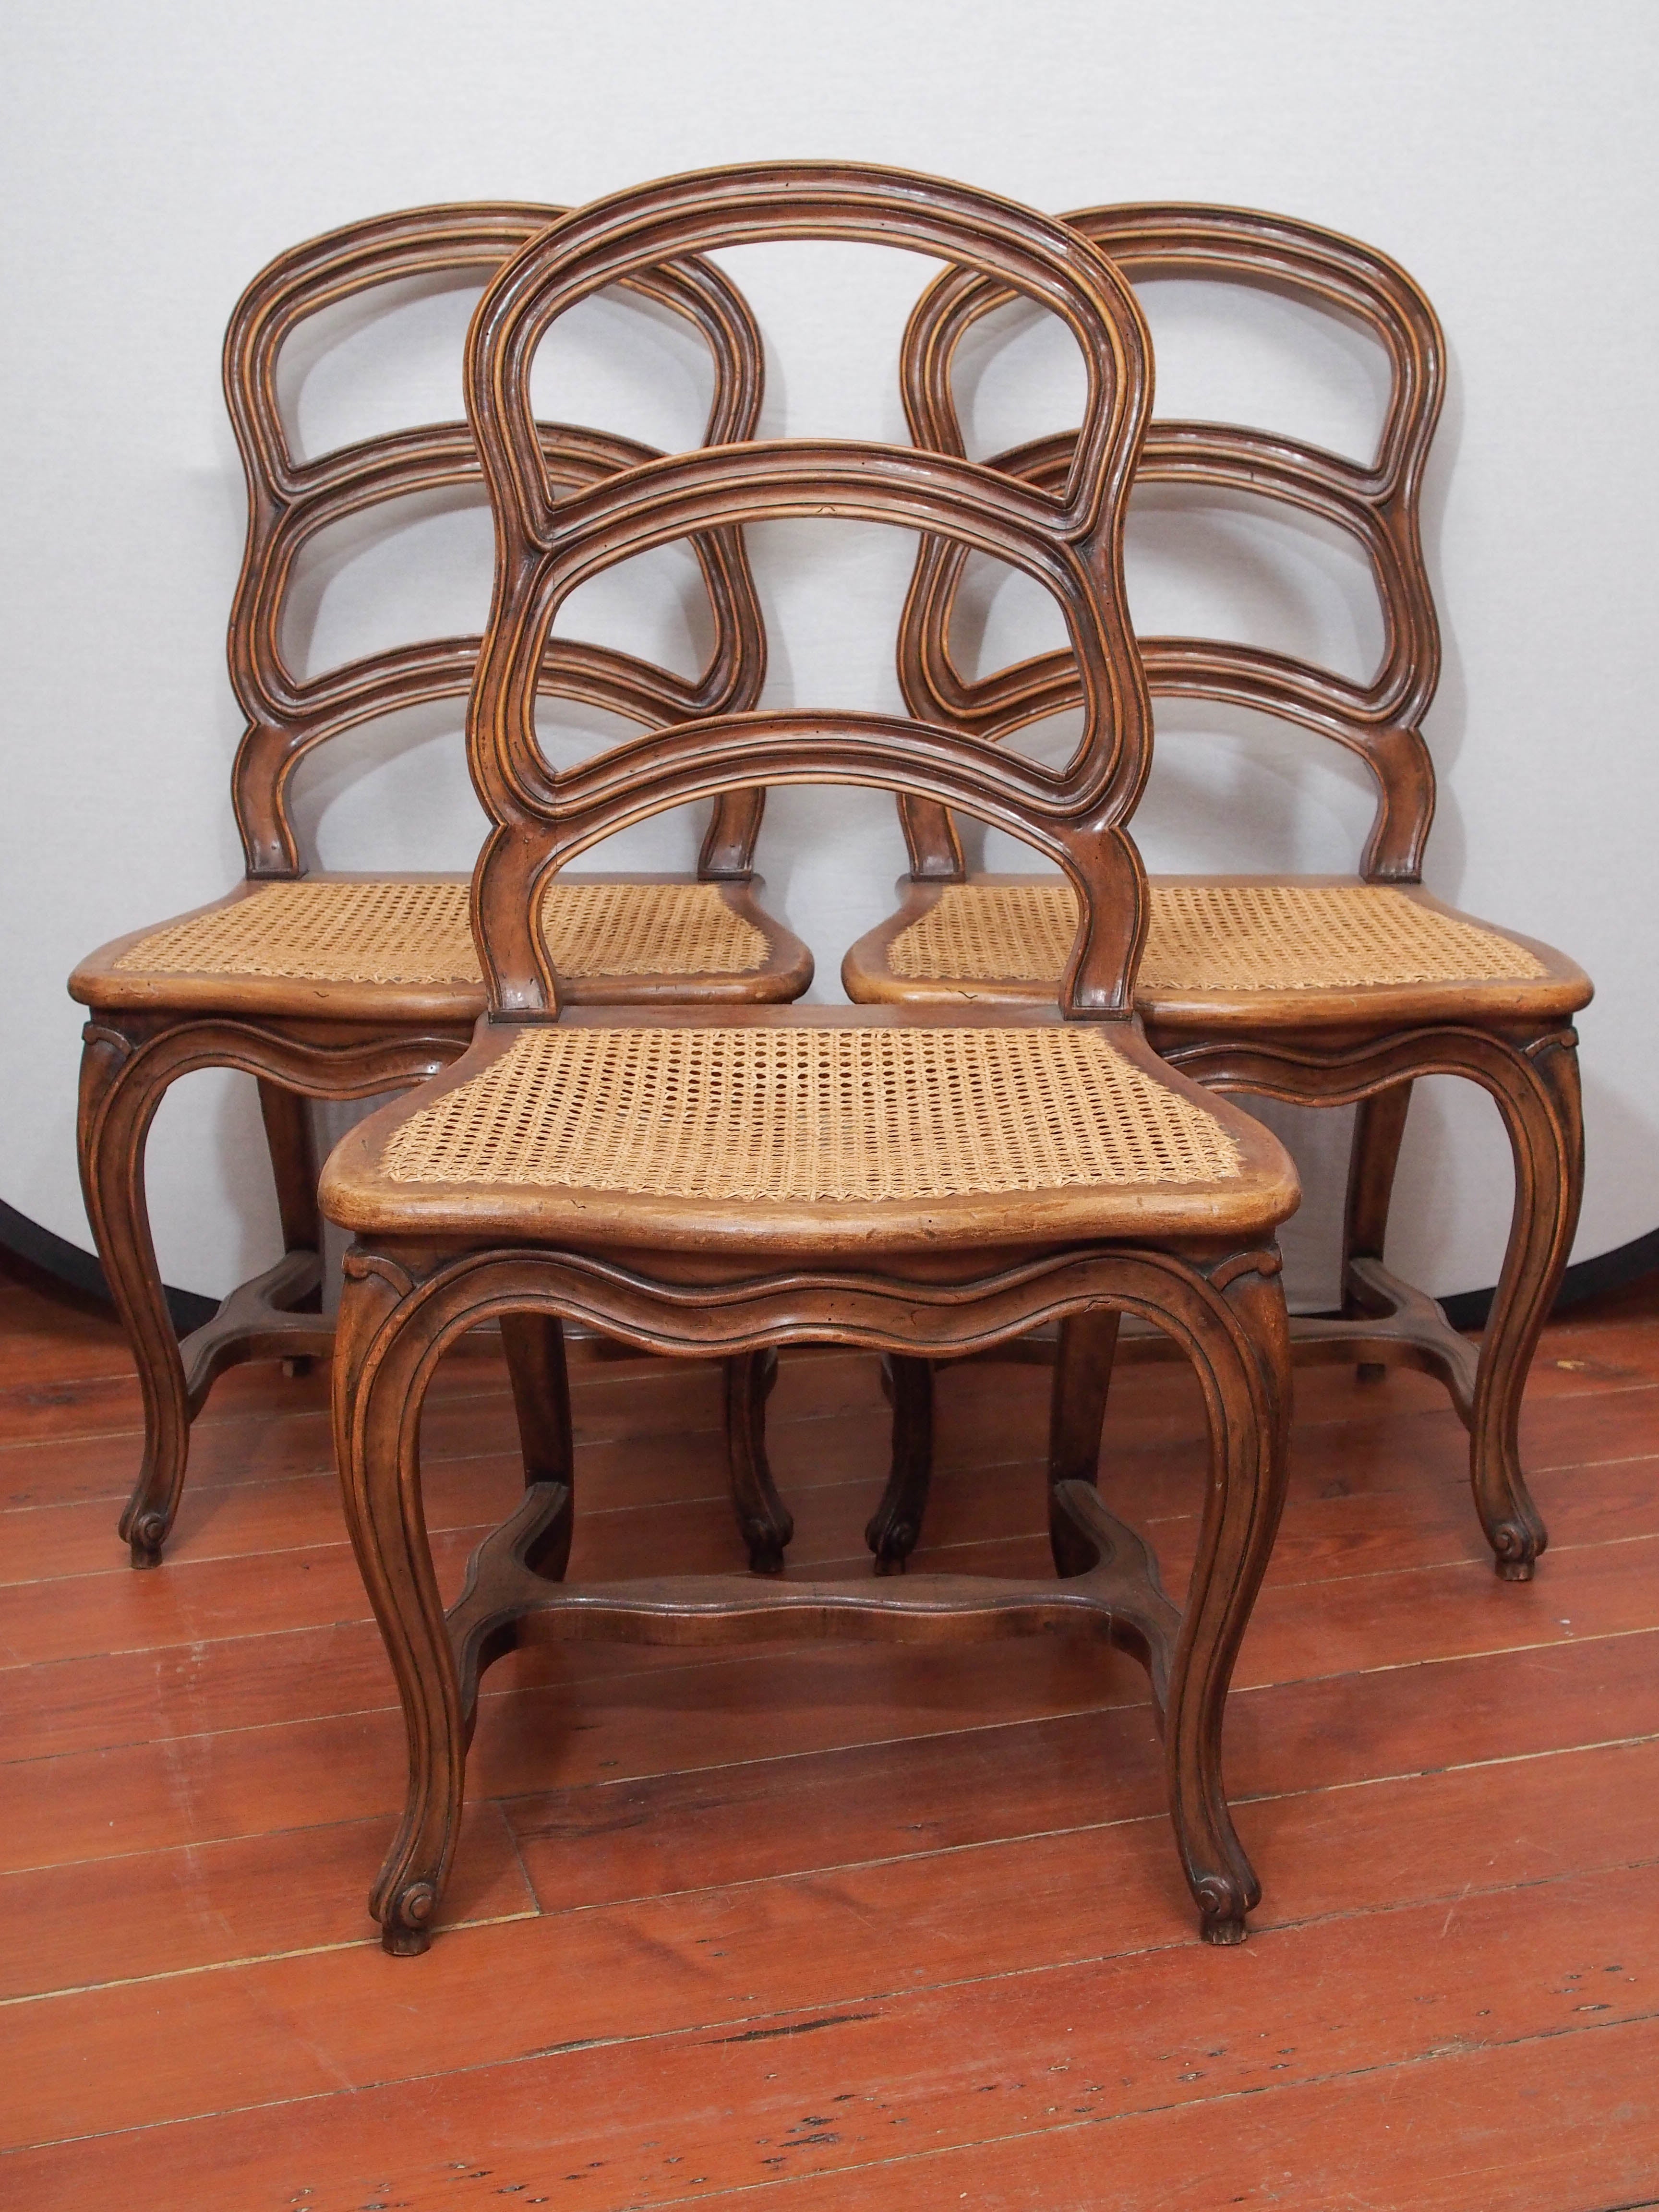 Set of Six Commodious French Walnut Dining Chairs